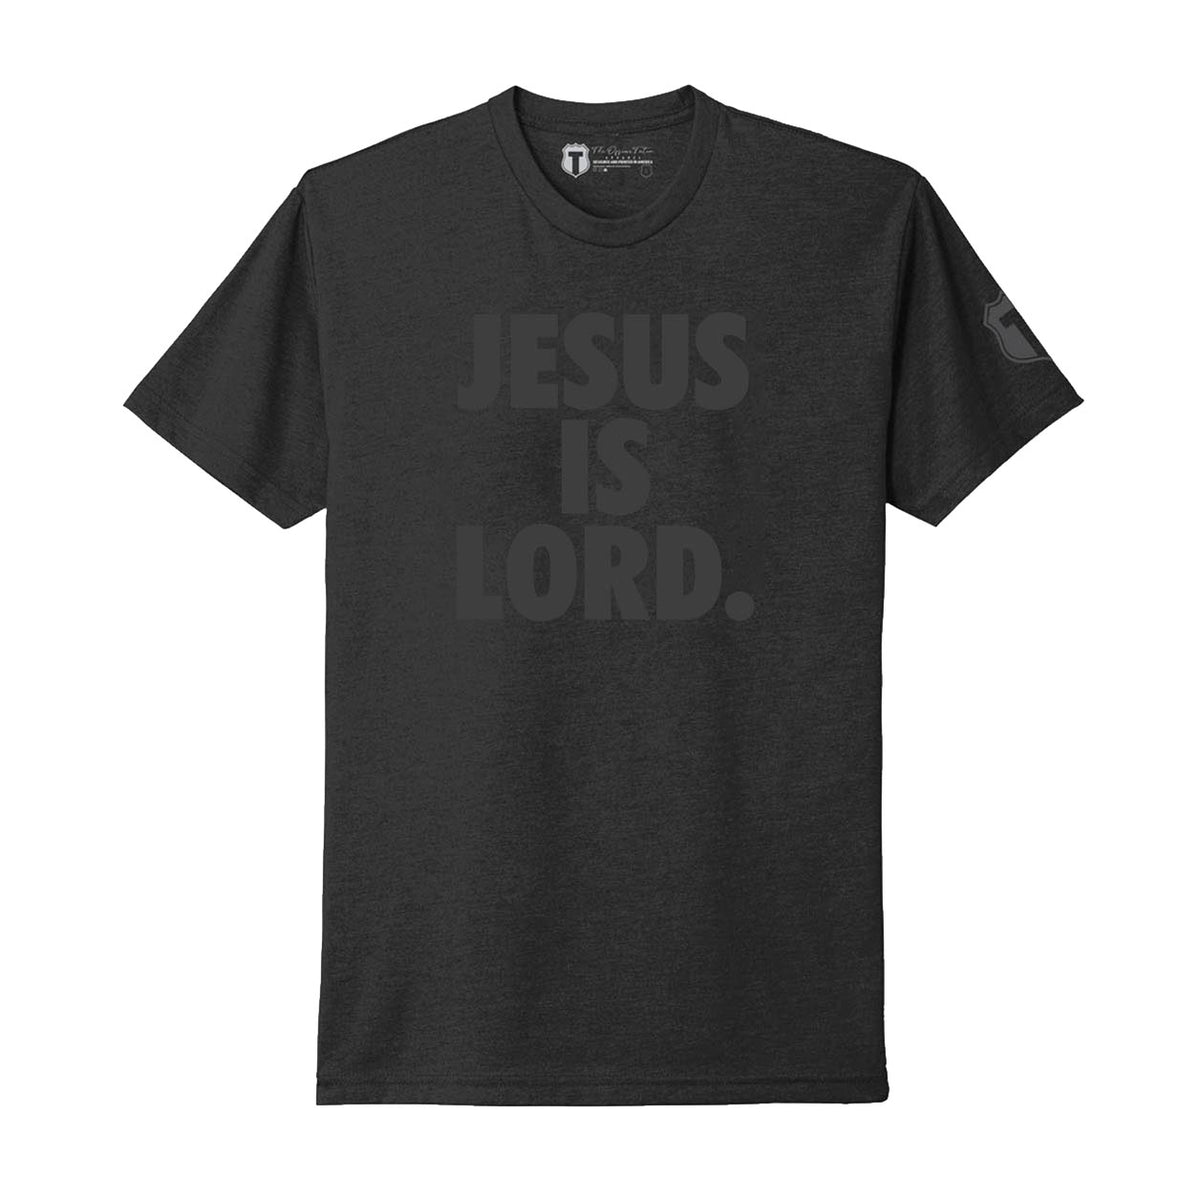 Jesus Is Lord (Blackout) – The Officer Tatum Store